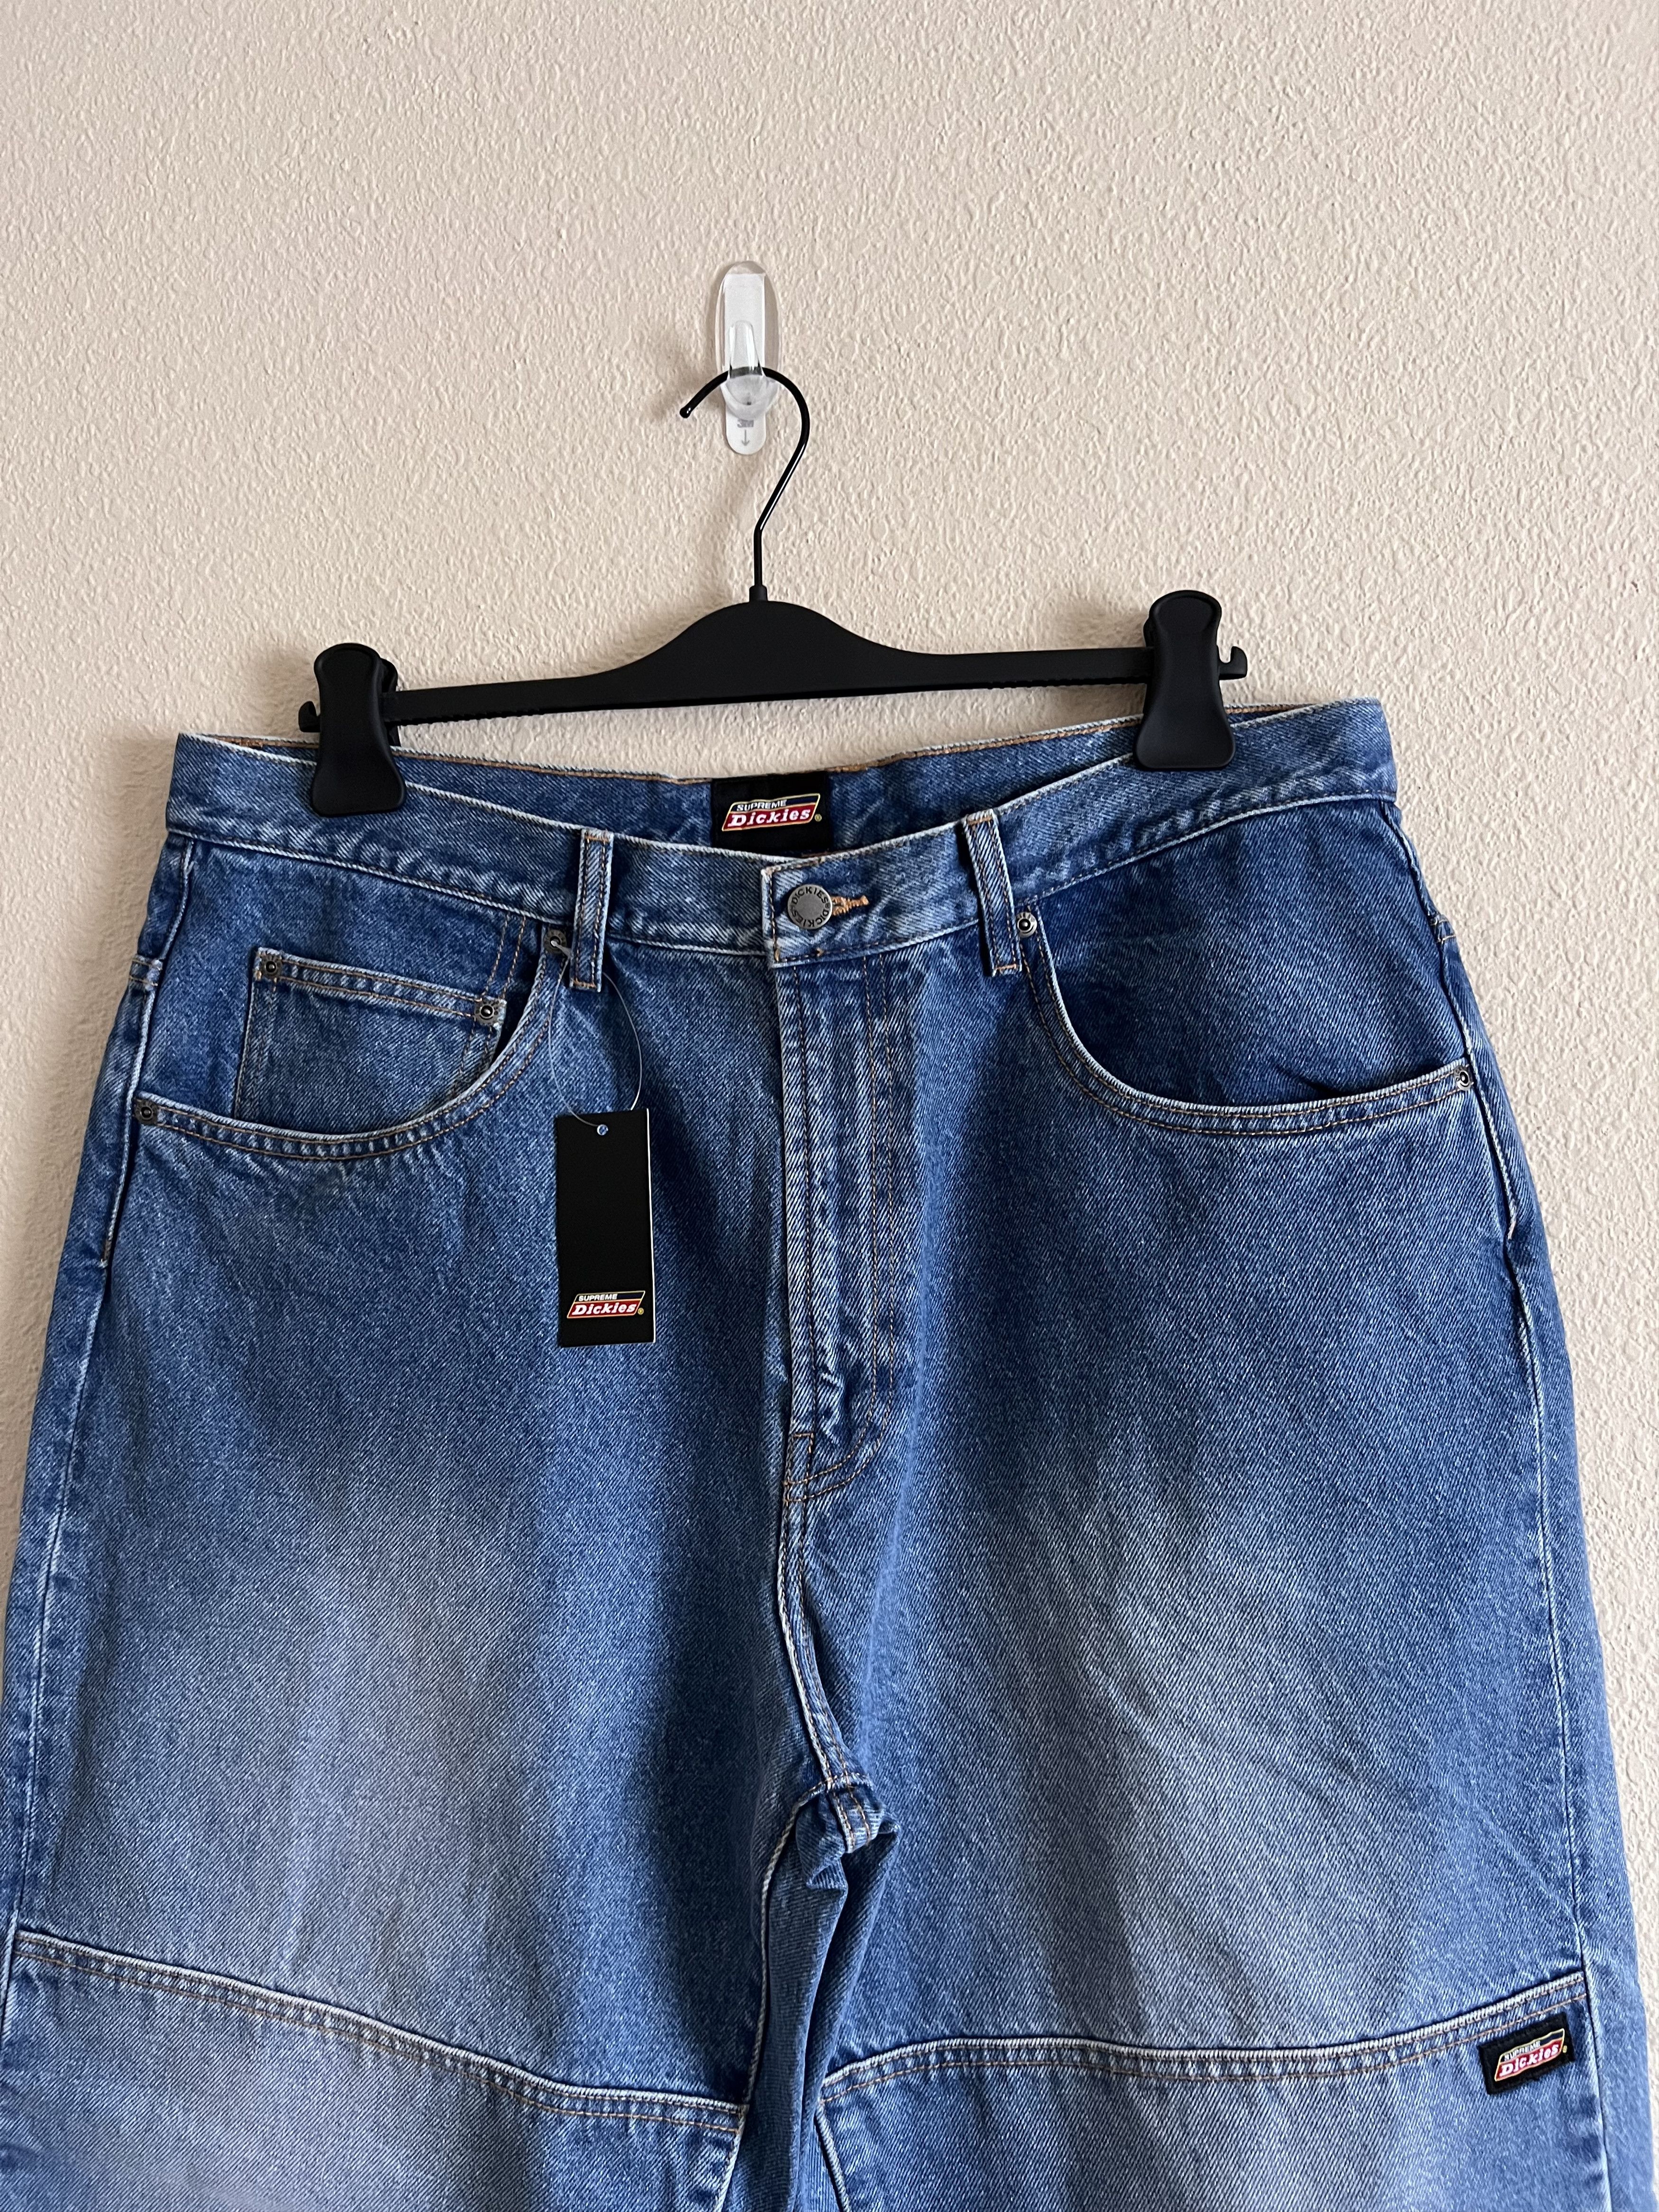 Supreme Supreme Dickies Double Knee Baggy Jeans in Washed Indigo | Grailed